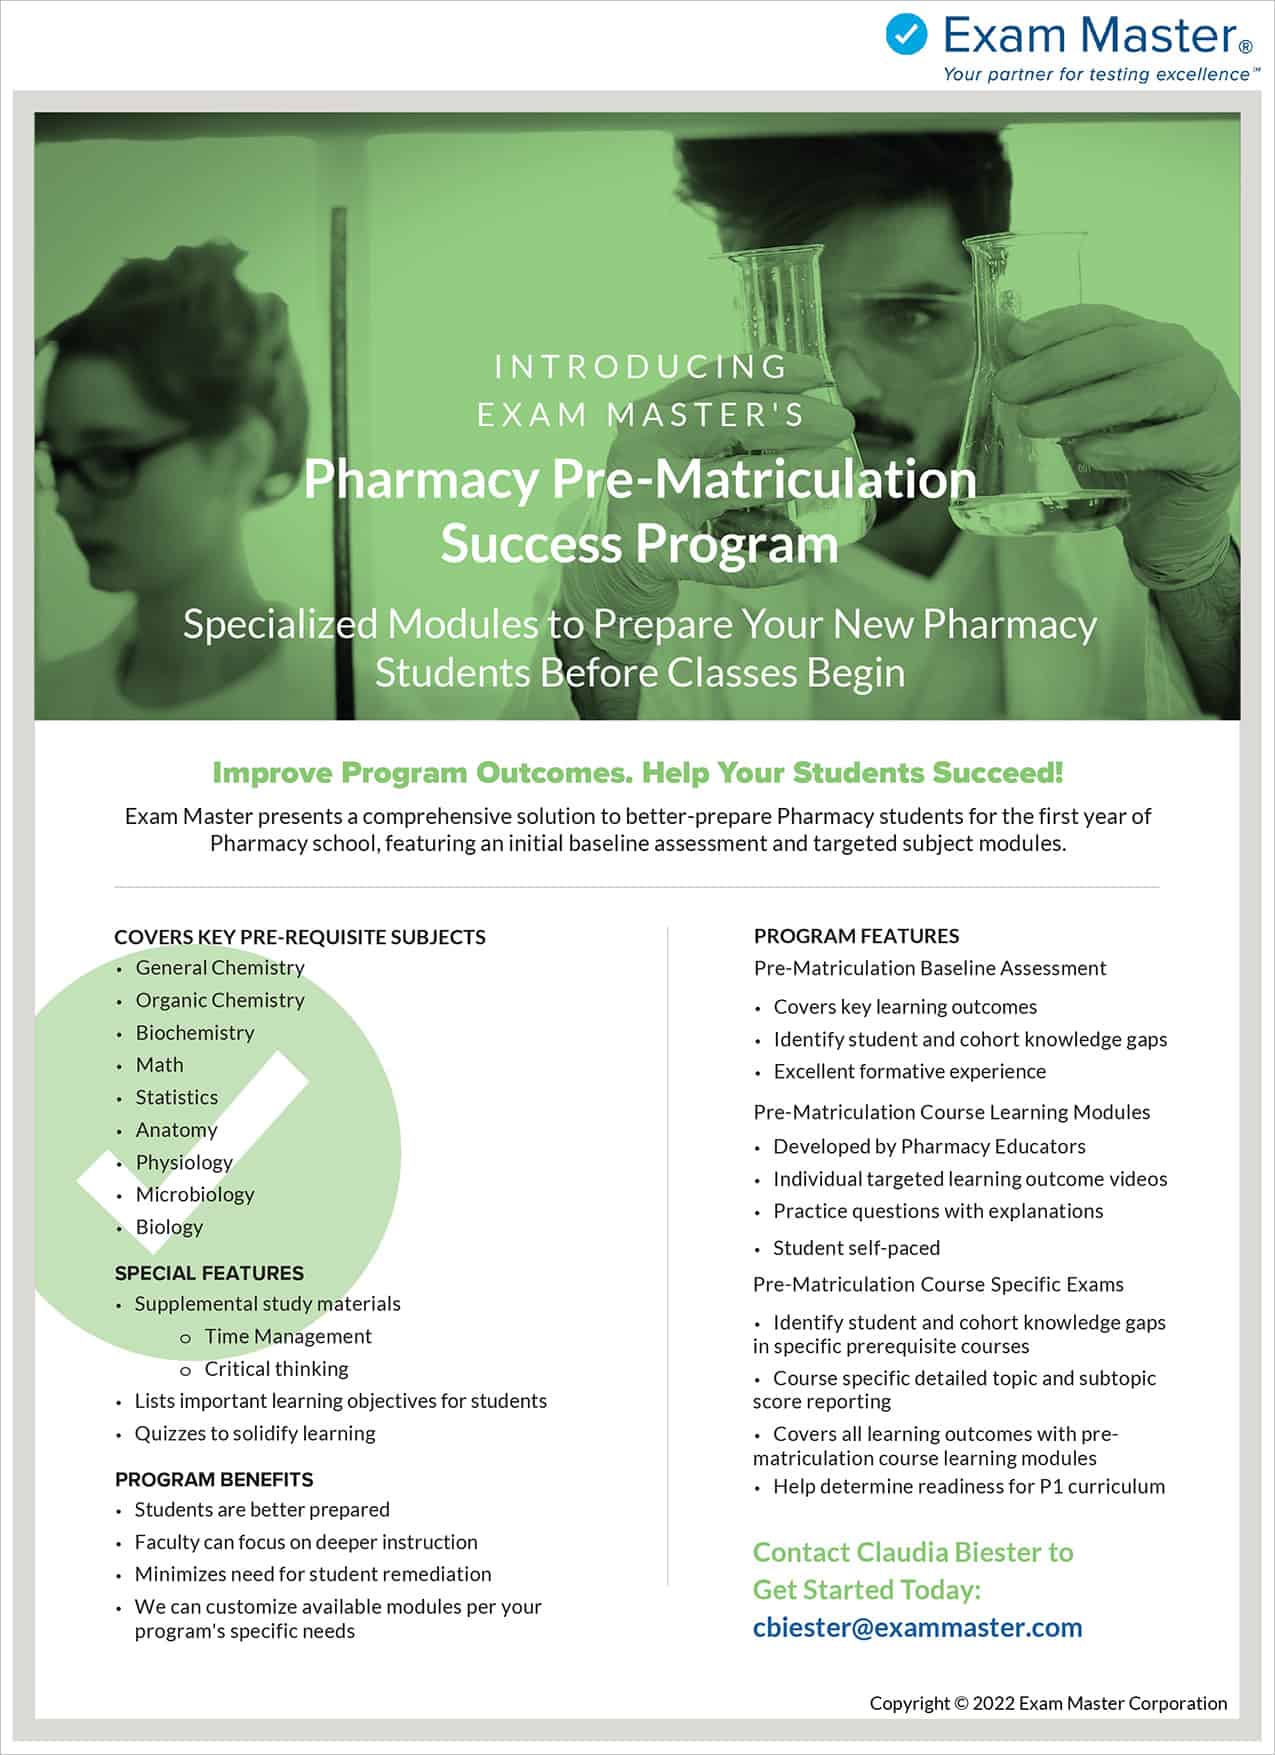 Pharmacy Pre-Matriculation Single-page Flier